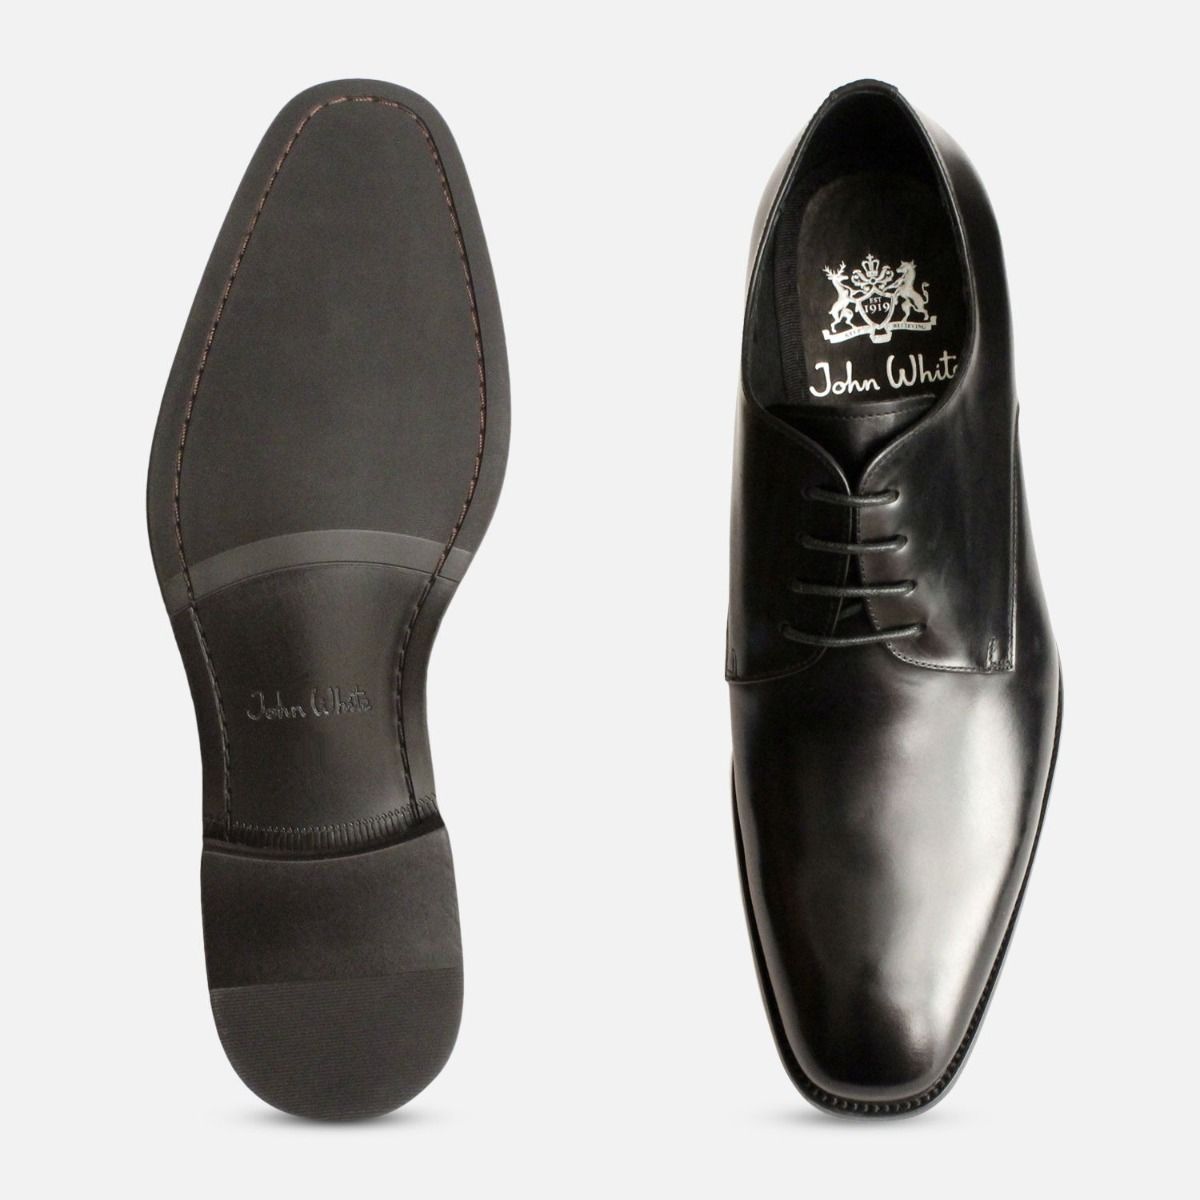 John White Shoes - Makers of Quality Men's Footwear for 100 years